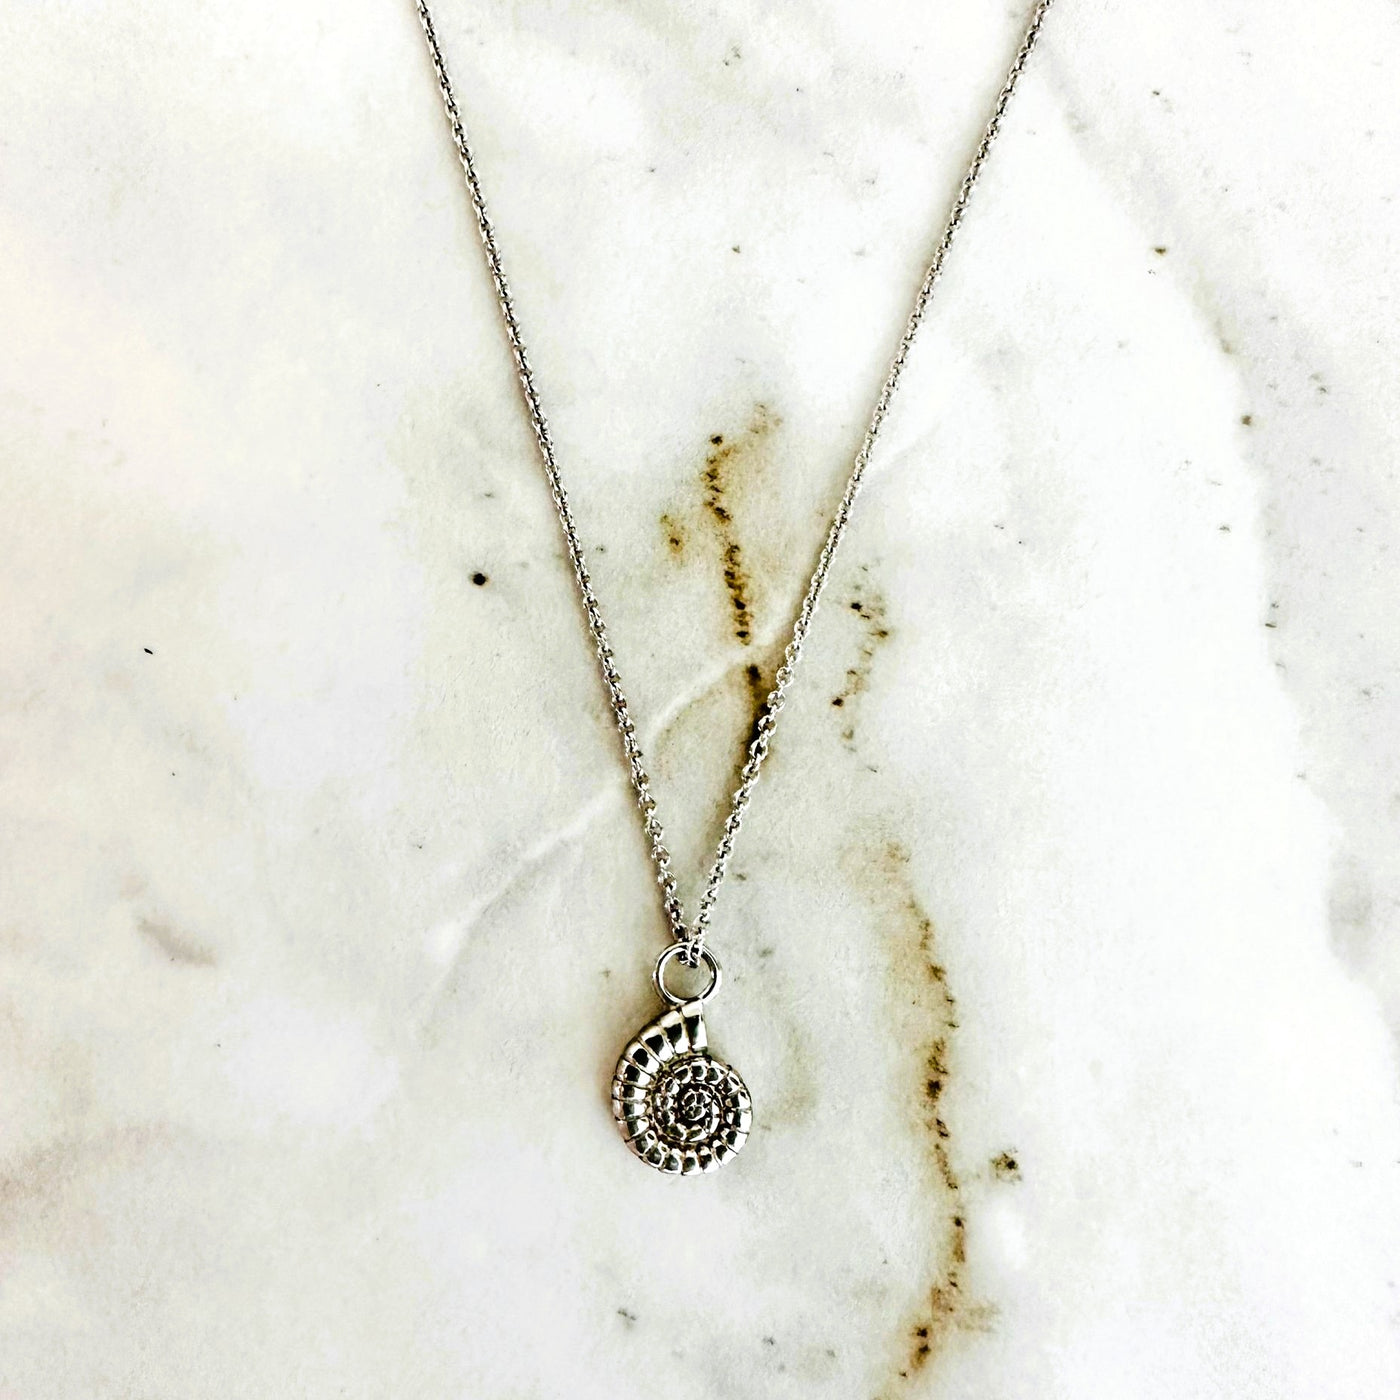 Sterling silver ammonite necklace